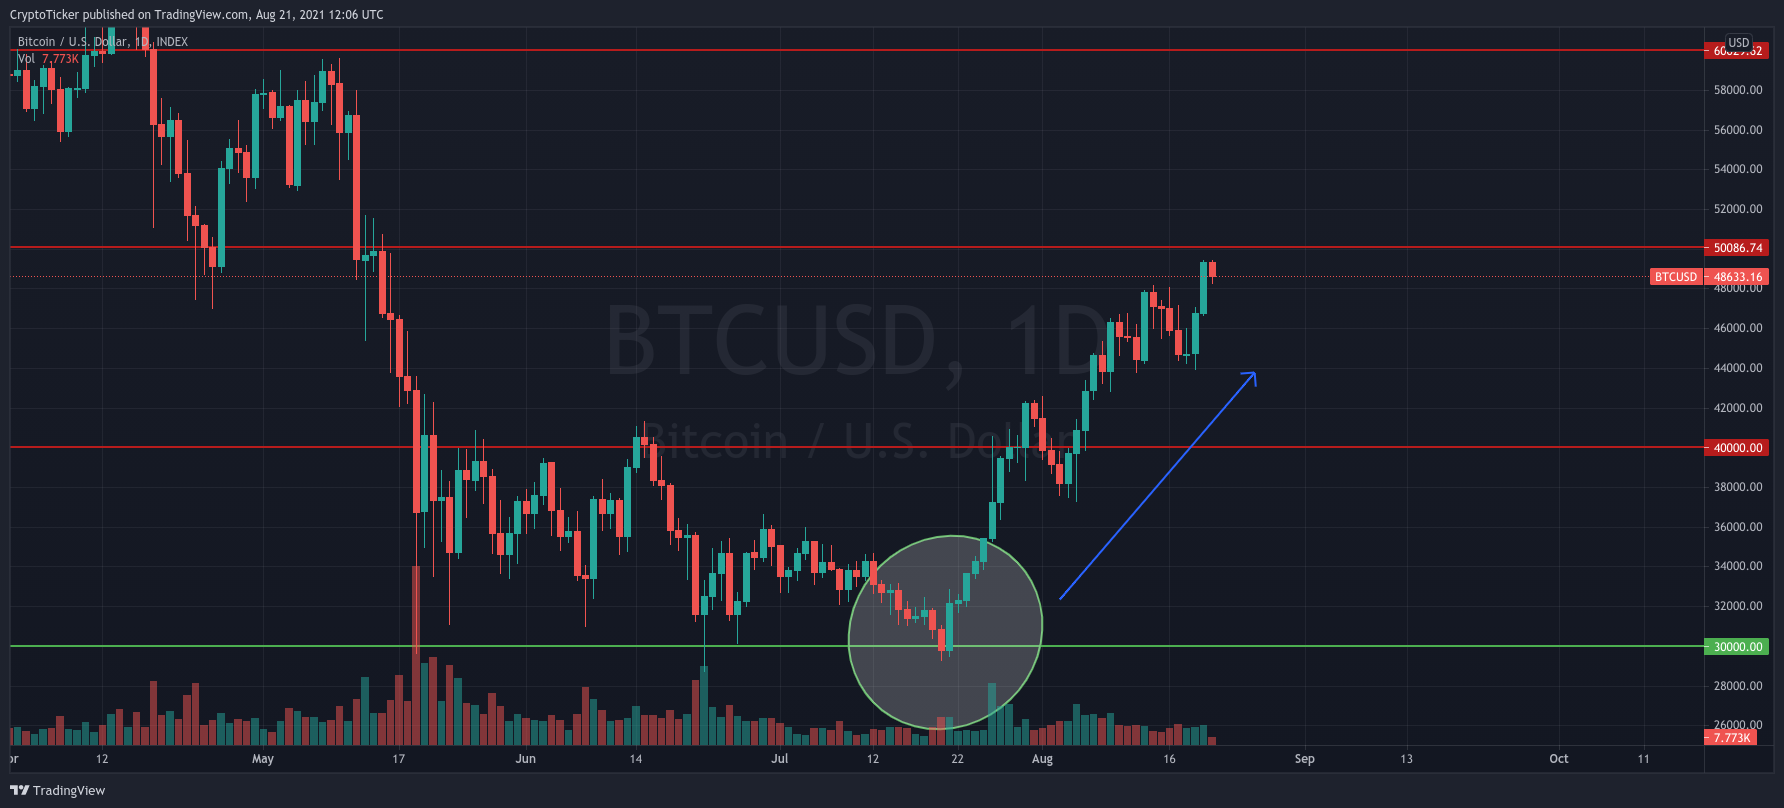 BTC/USD 1-day chart showing how BTC prices recovered - Bitcoin 50K